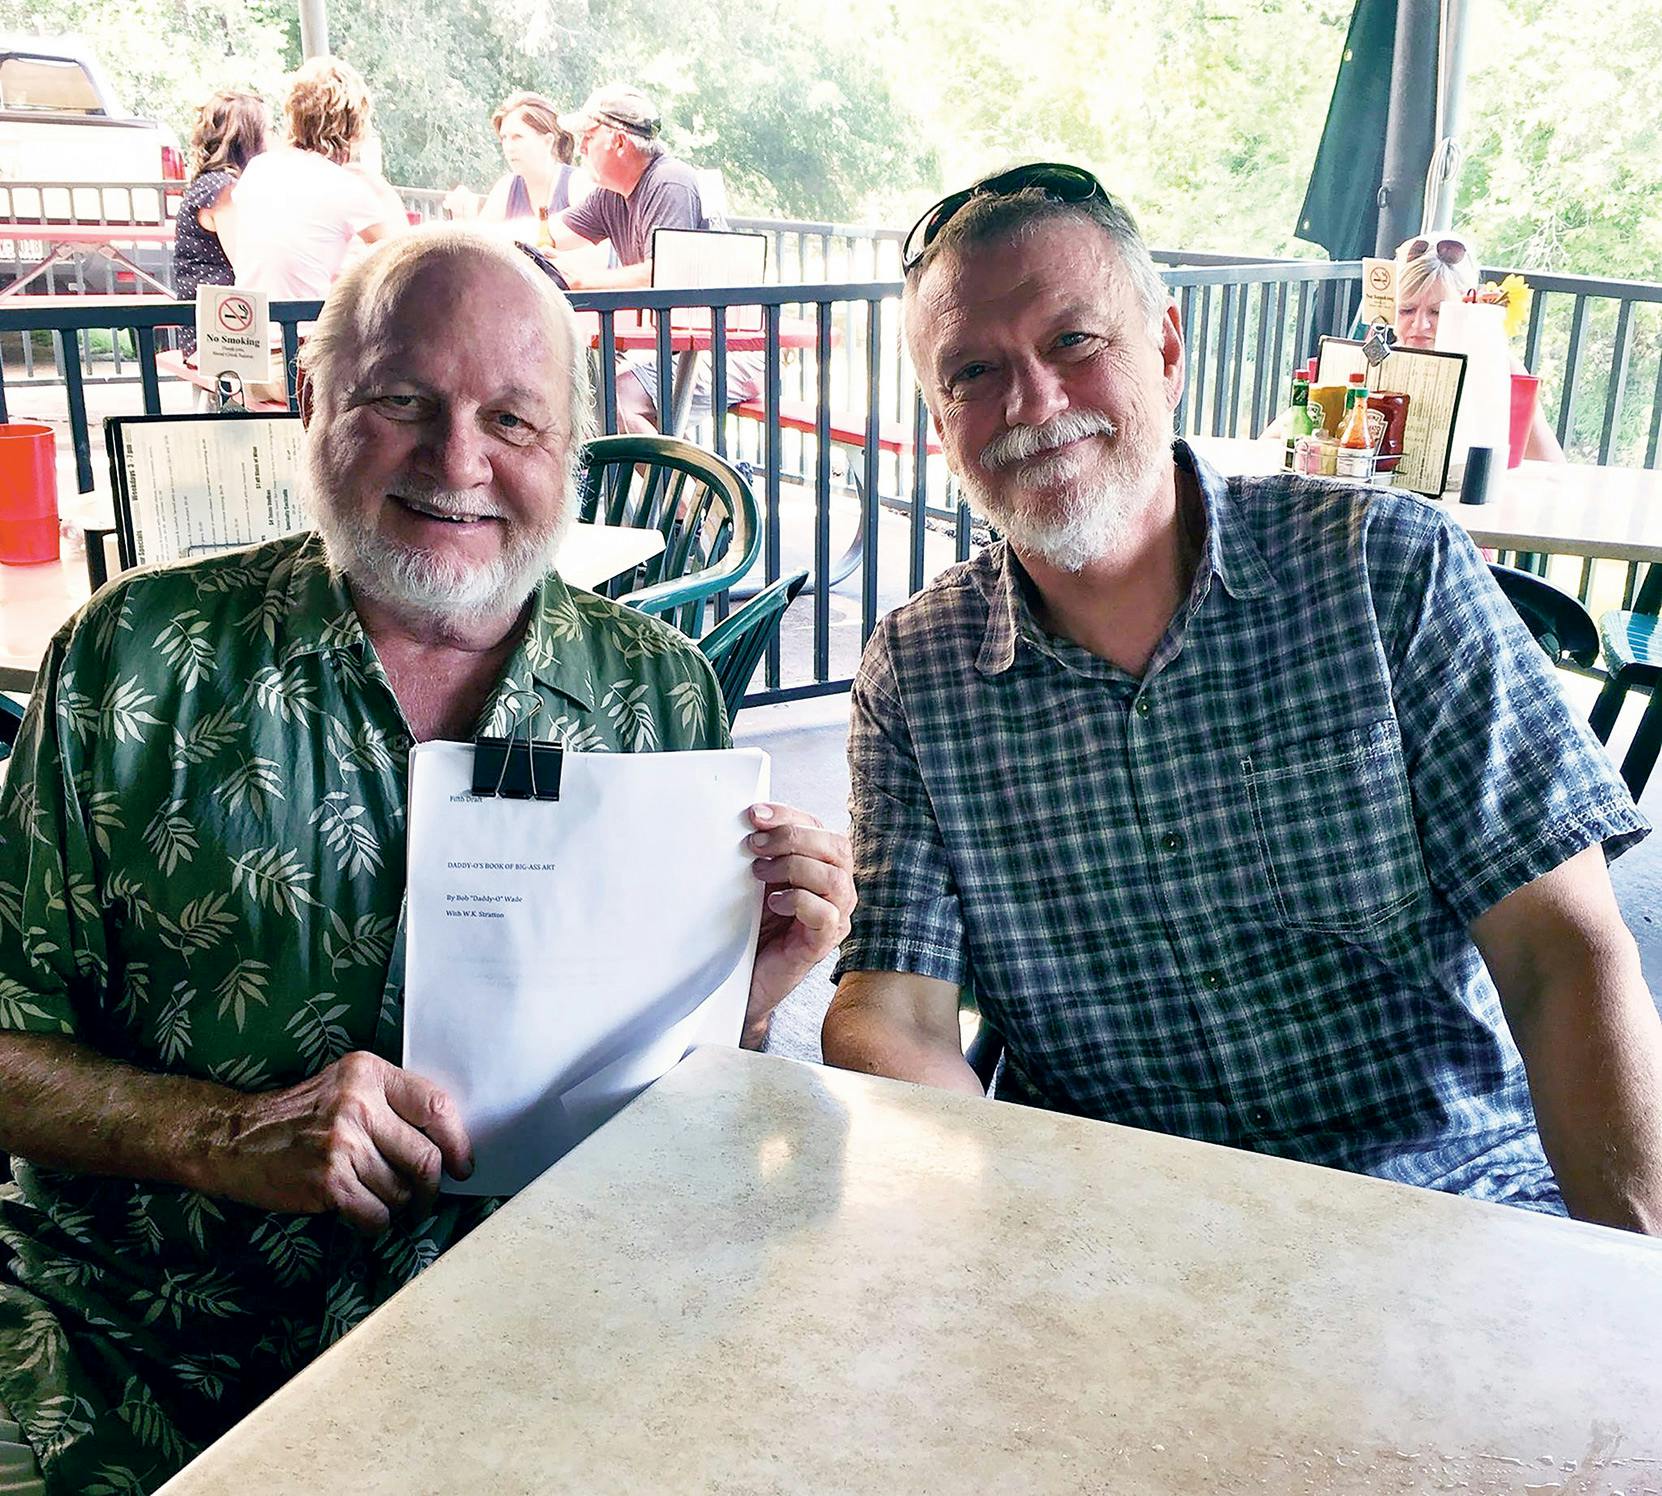 Bob and the author, W.K. Stratton, at Shoal Creek Saloon in Austin.